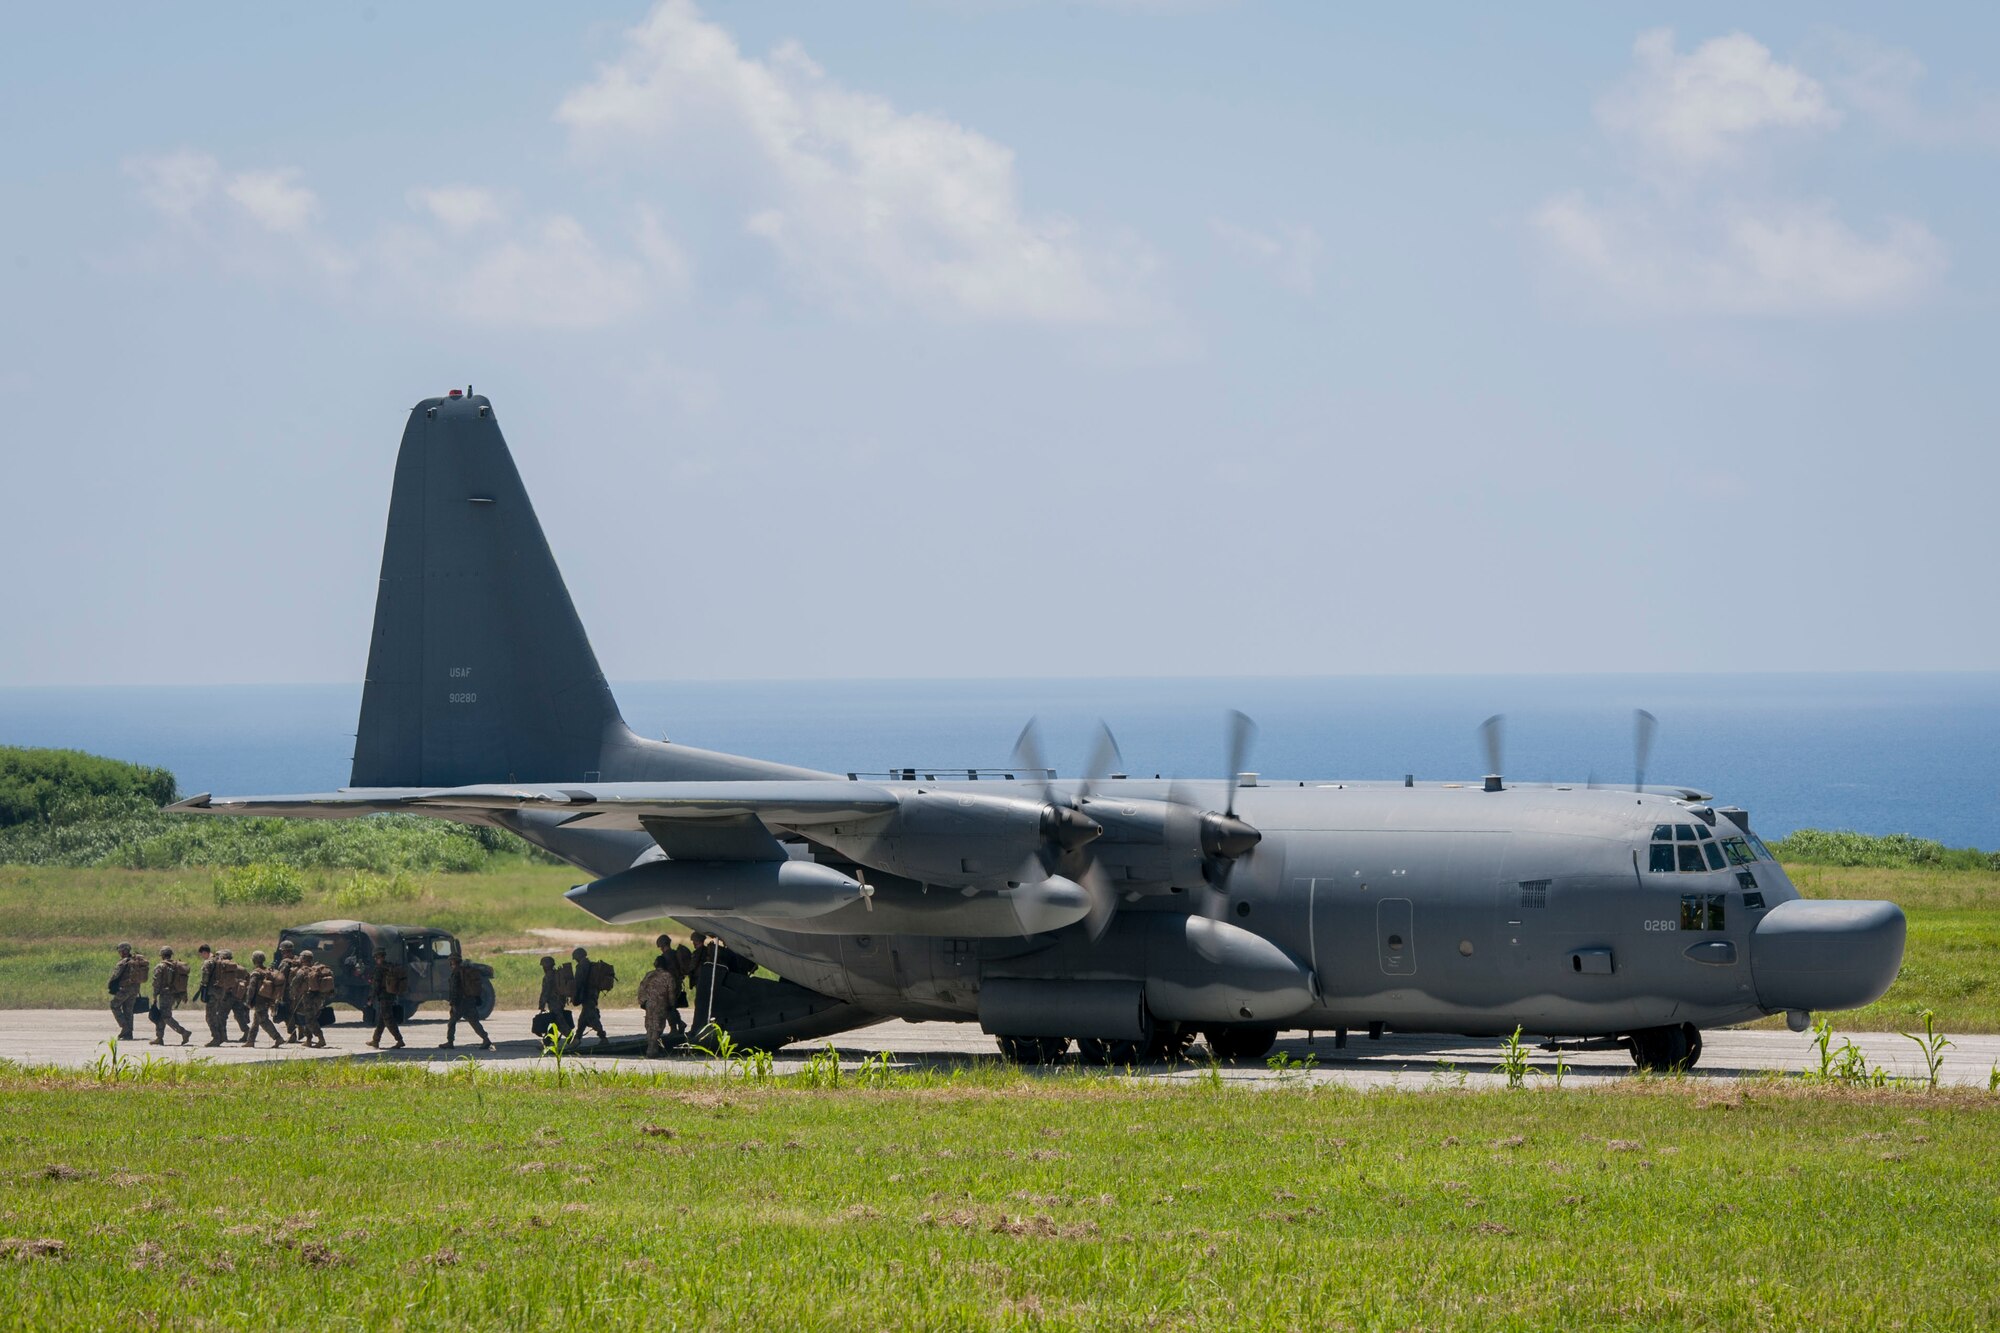 A U.S. Air Force MC-130H Combat Talon II assigned to the 17th Special Operations Squadron, Kadena Air Base, Japan, unloads U.S. Marines assigned to Golf Company, 2nd Battalion, 2nd Marine Regiment, Camp Lejeune, N.C., during a long-range airfield seizure July 20, 2016, at Iejima airfield, Japan. The Air Force and Marine Corps units combined forces in an exercise that helped build joint training relationships, enhancing interoperability of separate combat forces for contingency operations. (U.S. Air Force Photo by Senior Airman Peter Reft) 